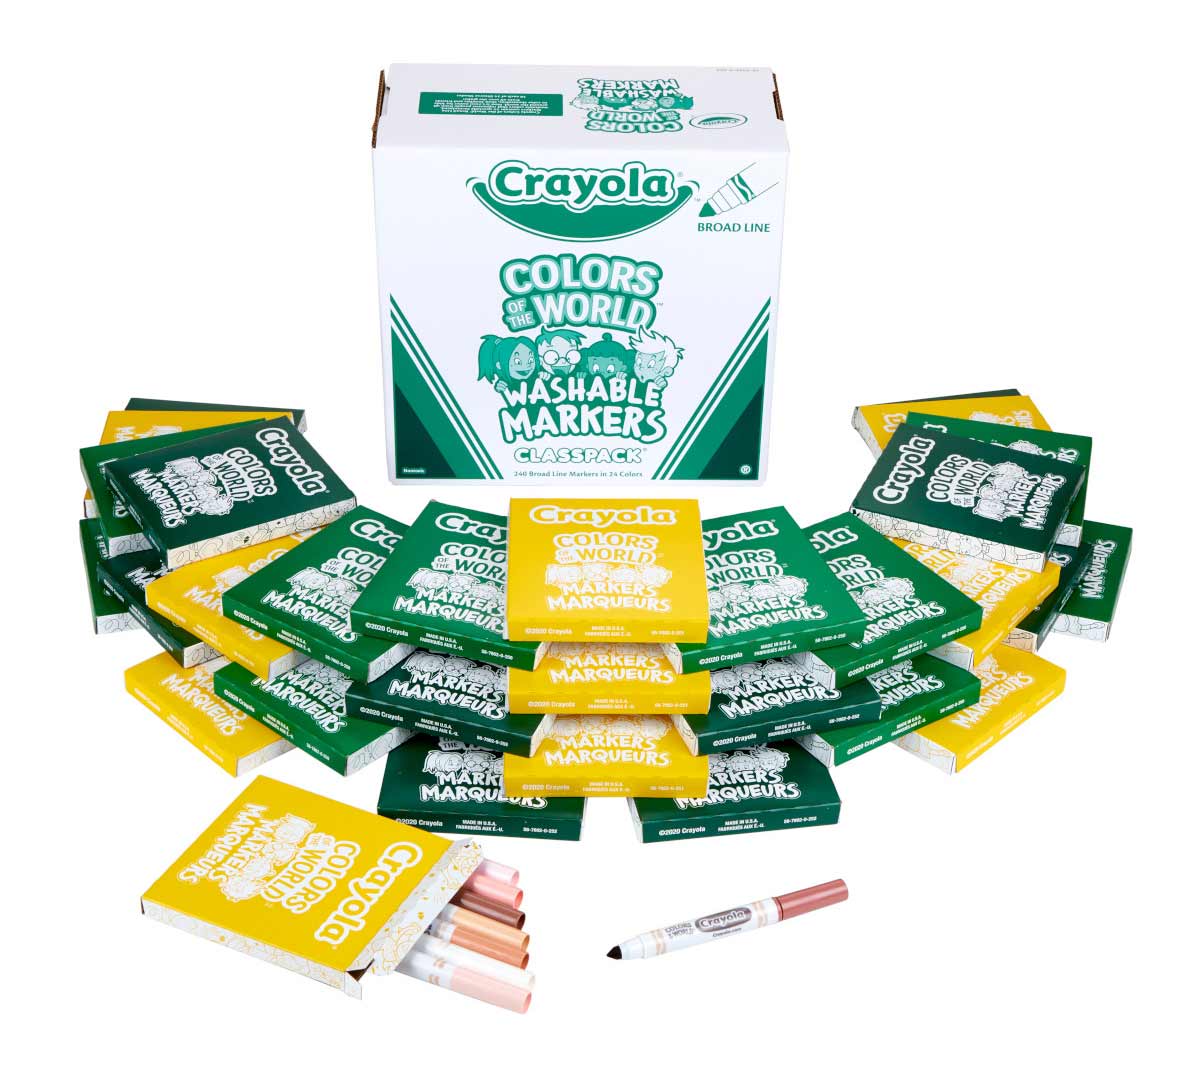 Crayola Bulk Buy Broad Line Markers 10 Pack Assorted Colors 58-7725 (3-Pack)